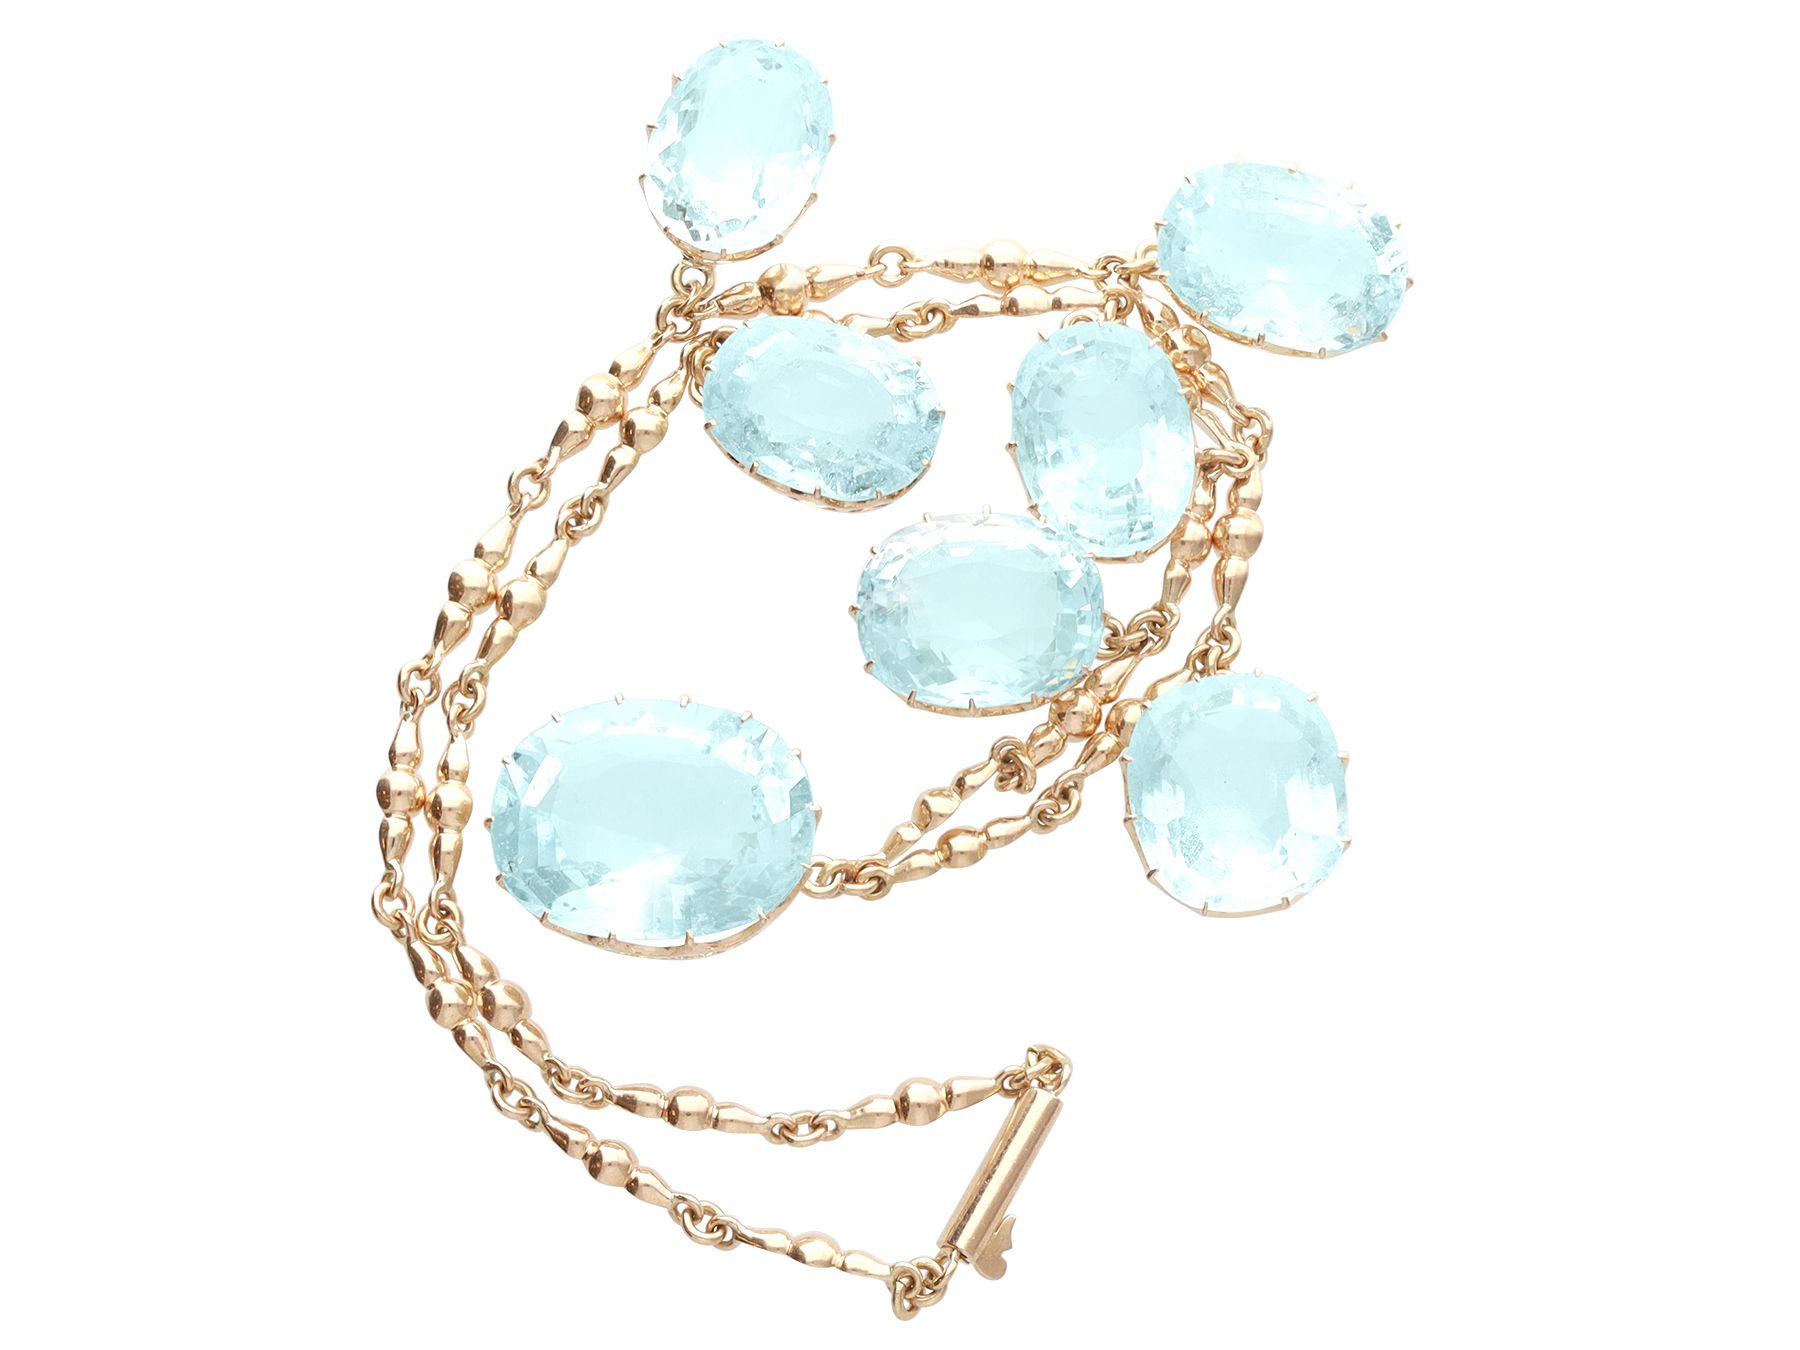 Antique 104.26 Carat Aquamarine and Rose Gold Necklace, circa 1920 In Excellent Condition For Sale In Jesmond, Newcastle Upon Tyne